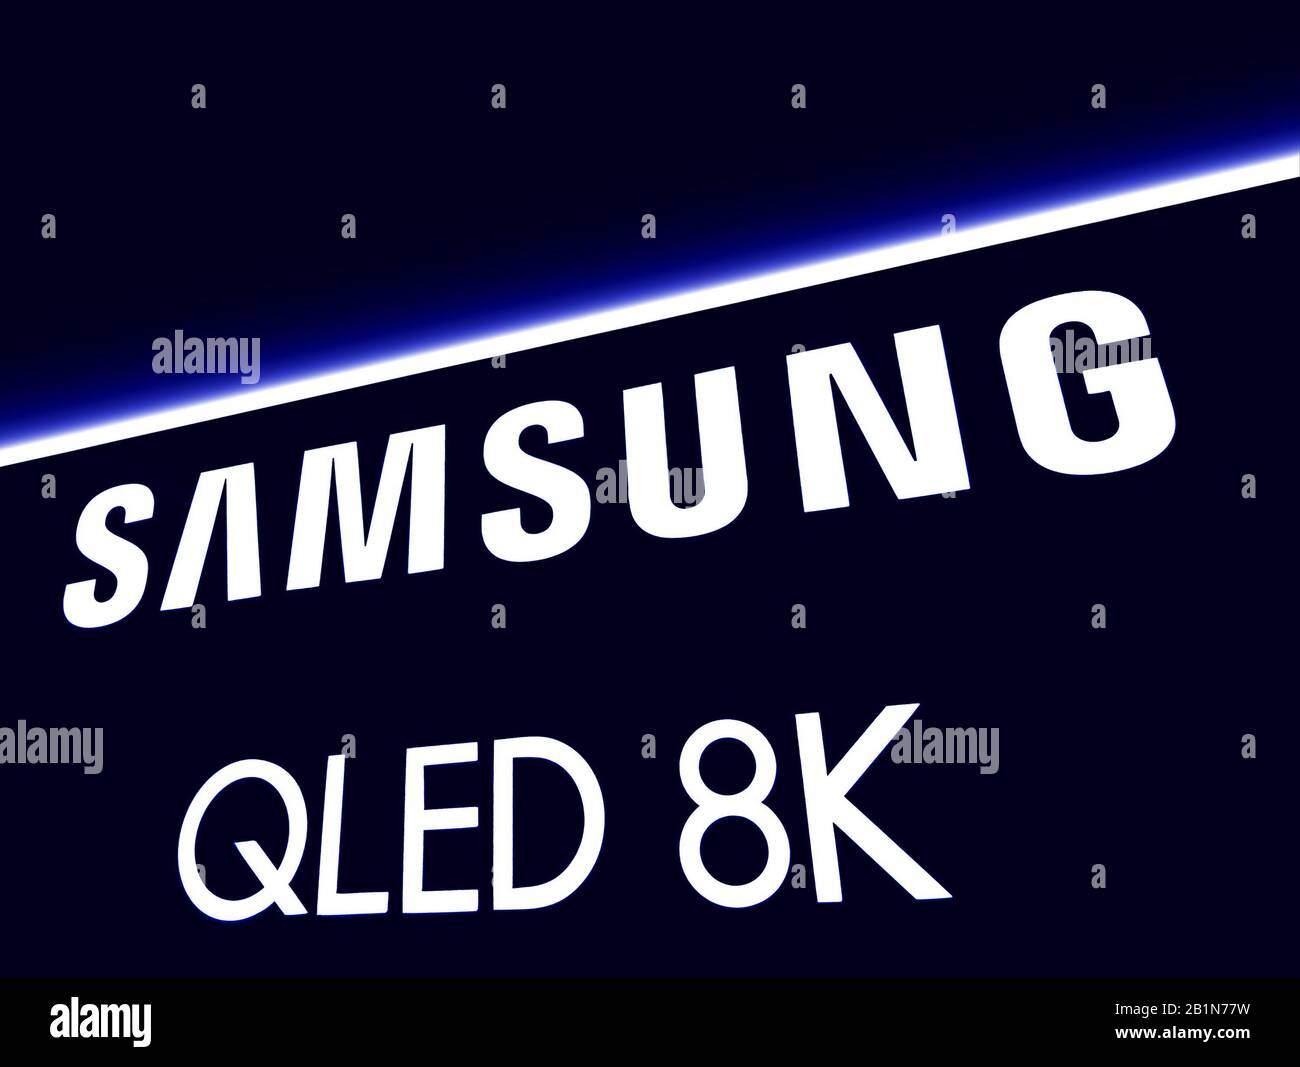 Samsung QLED 8k, contrasted logotype from Expo Stock Photo